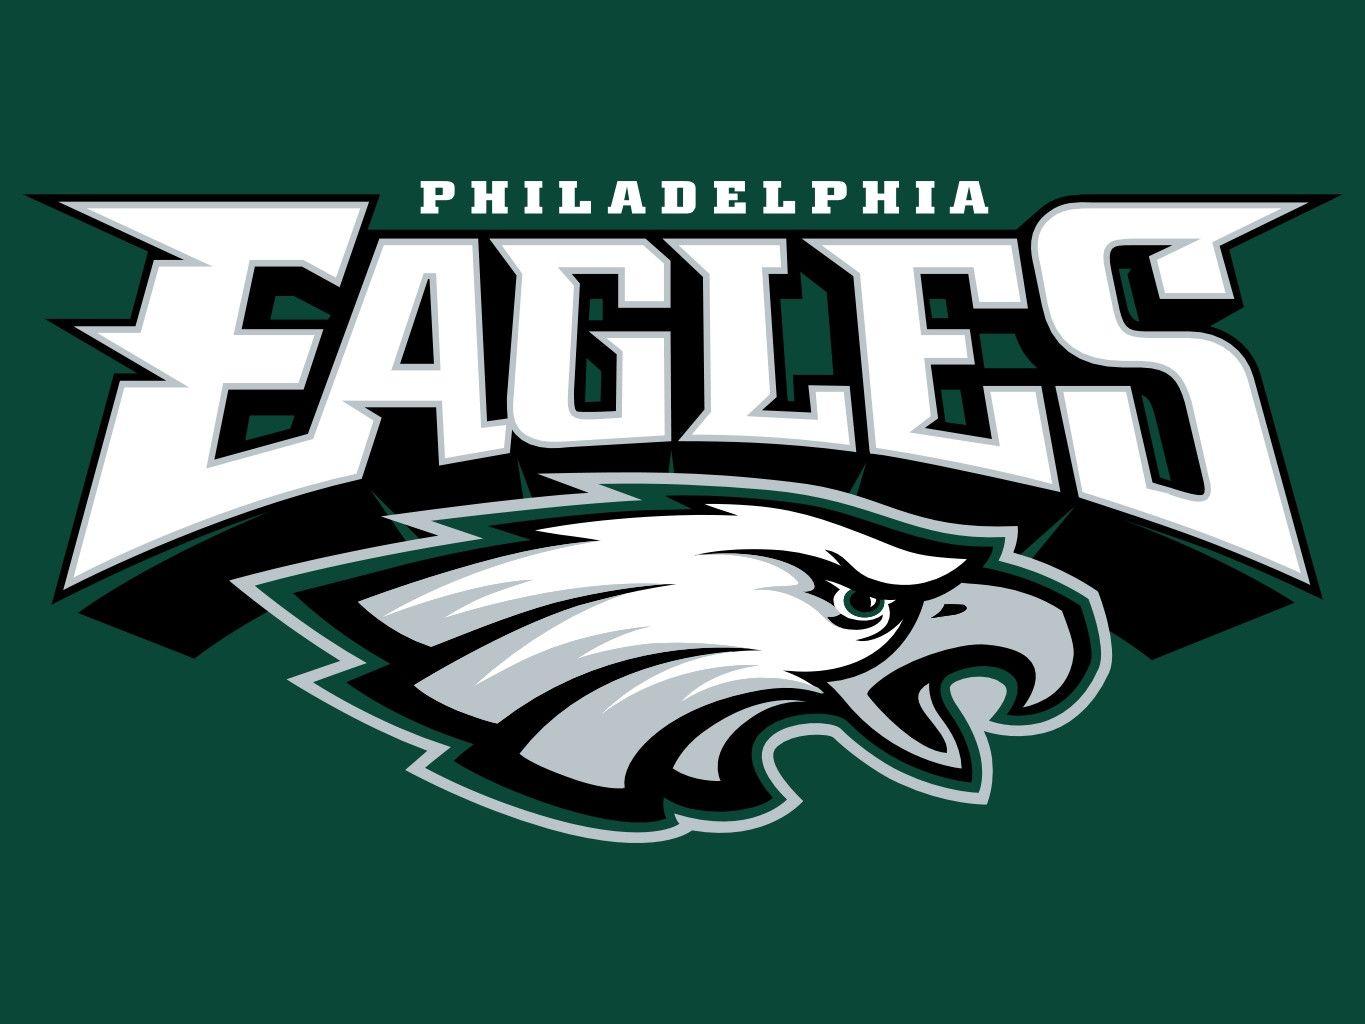 Philadelphia Eagles Logos Background Picture Of The Eagles Logo Background  Image And Wallpaper for Free Download